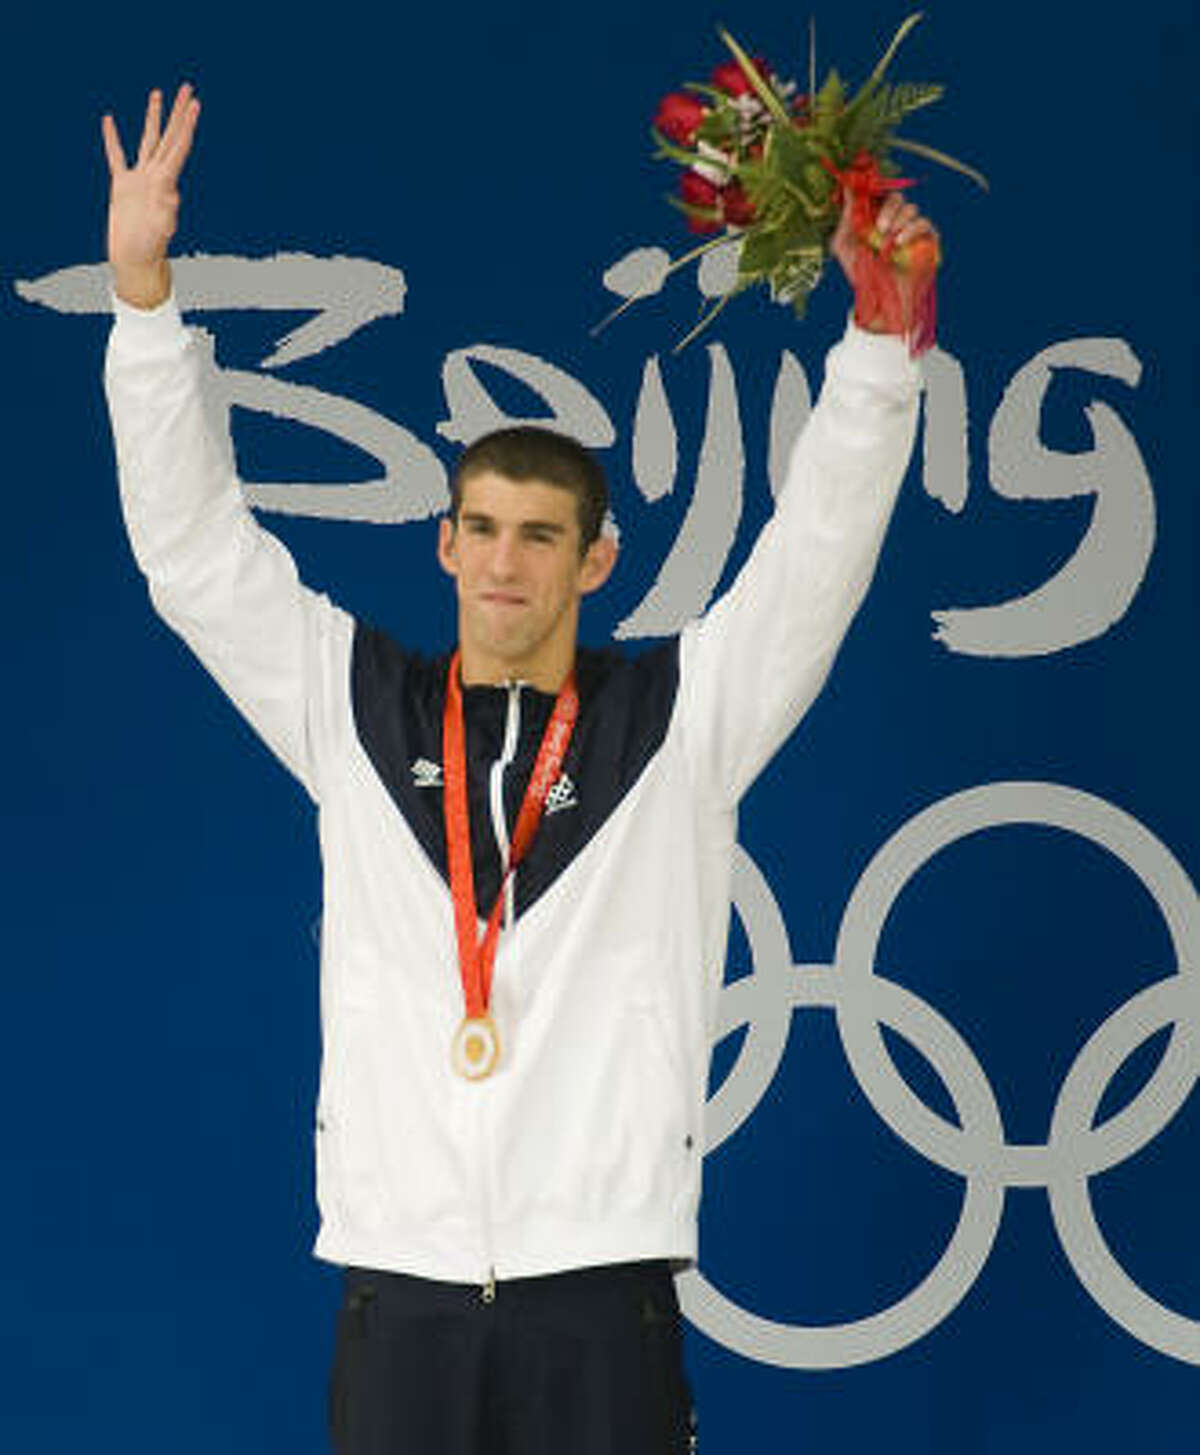 Michael Phelps acquired enough gold to affect the commodities market, winning eight times and setting numerous records, individual and relay.